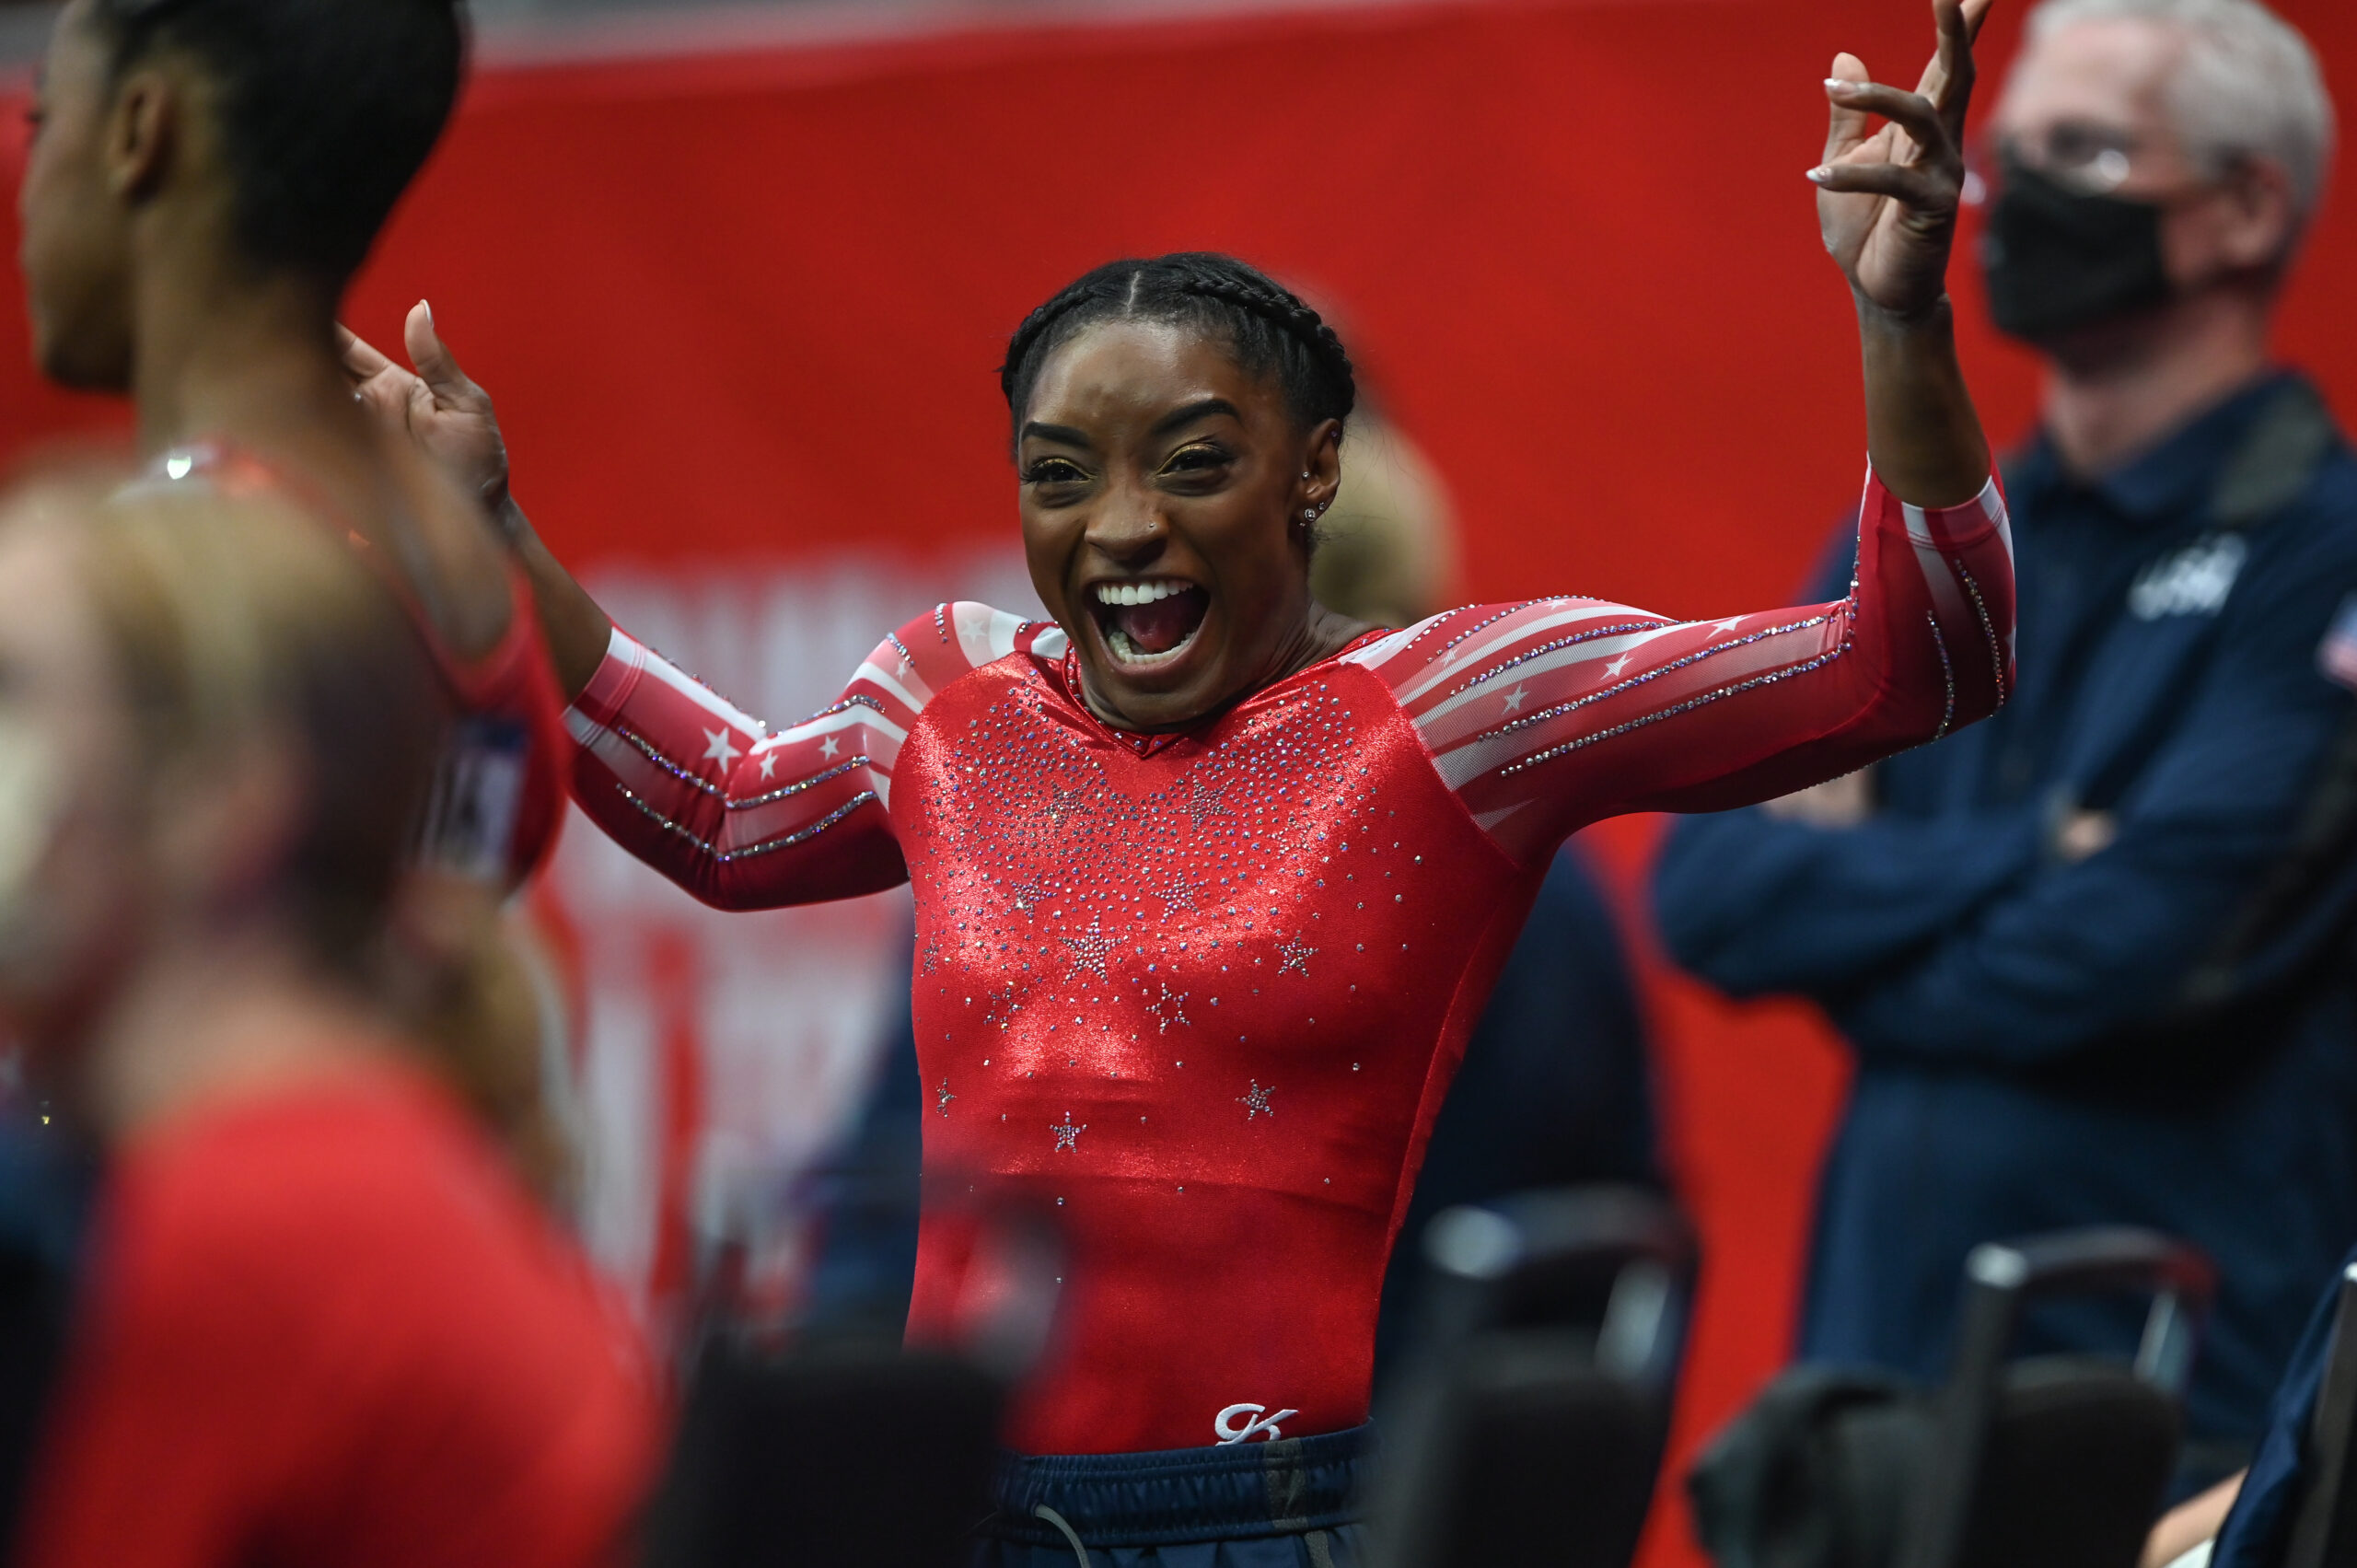 Simone Biles reacts during Day 2 of the 2021 U.S. Gymnastics Olympic Trials.